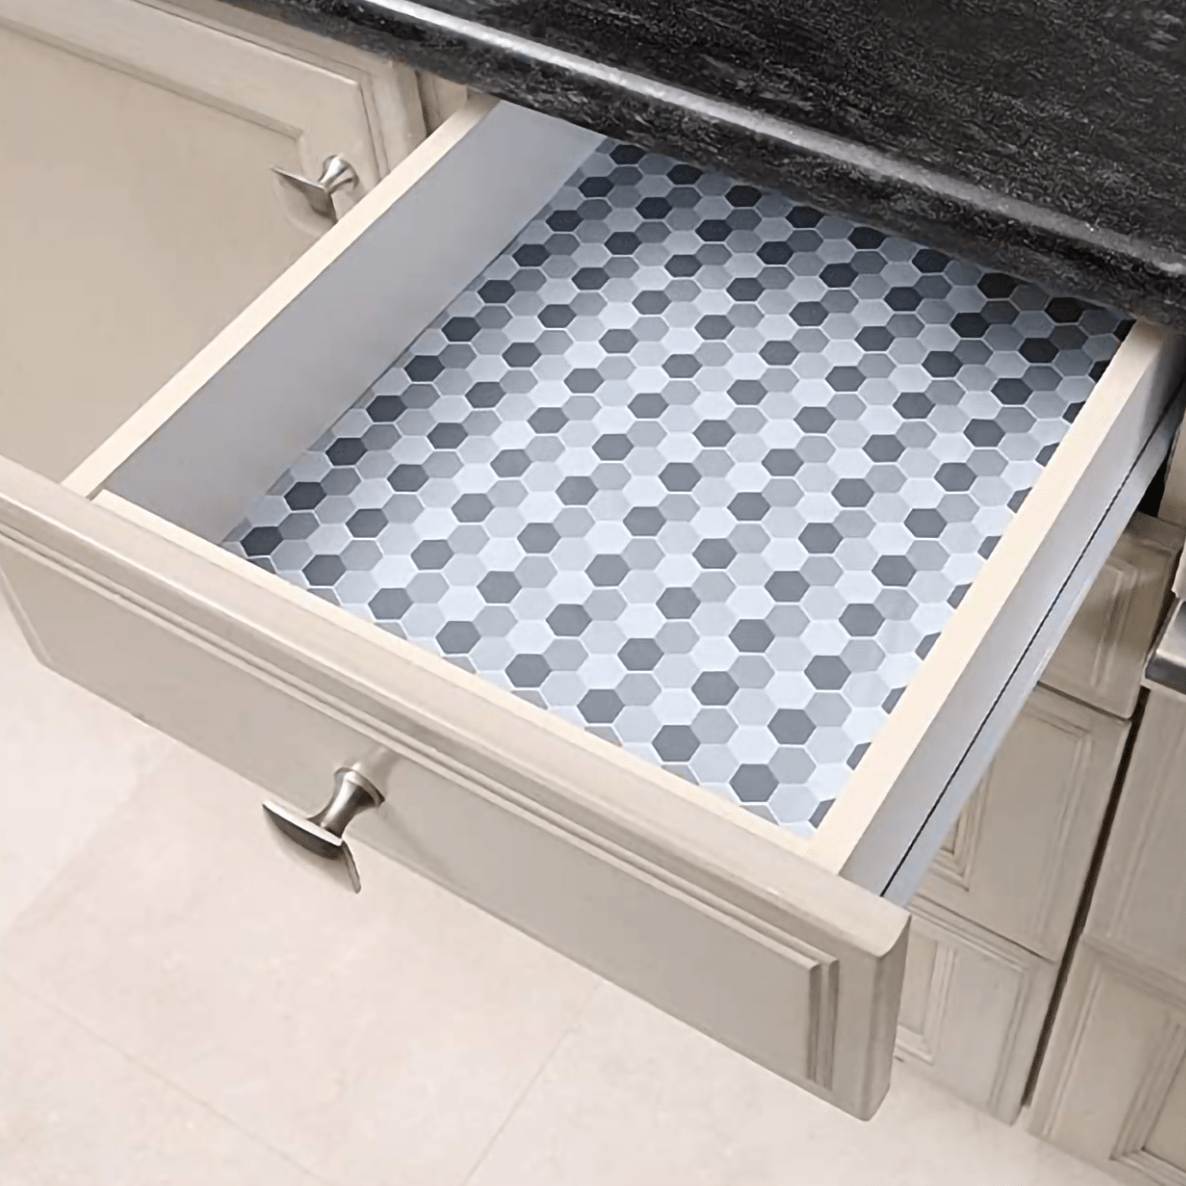 How to Choose The Best Kitchen Shelf Liner [7 Tips] - Everyday Old